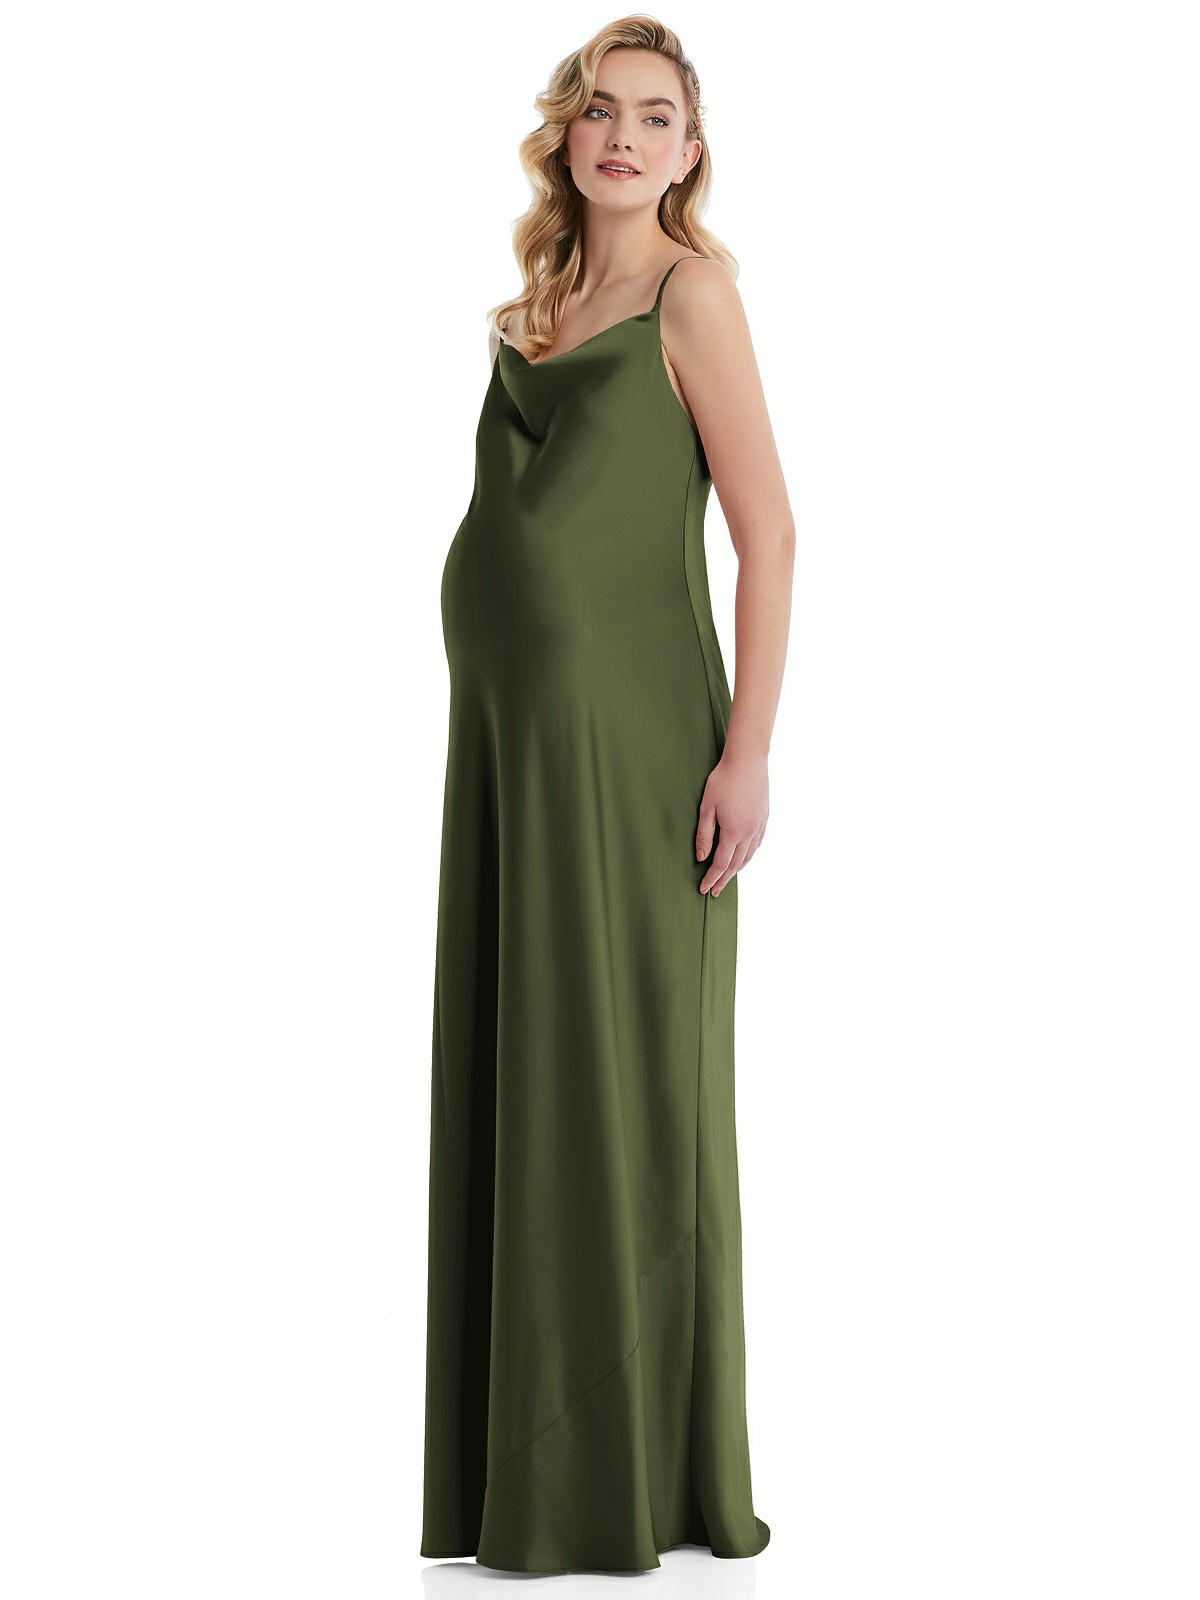 Gracie Maternity Bridesmaid Dress by Dessy – Olive Green